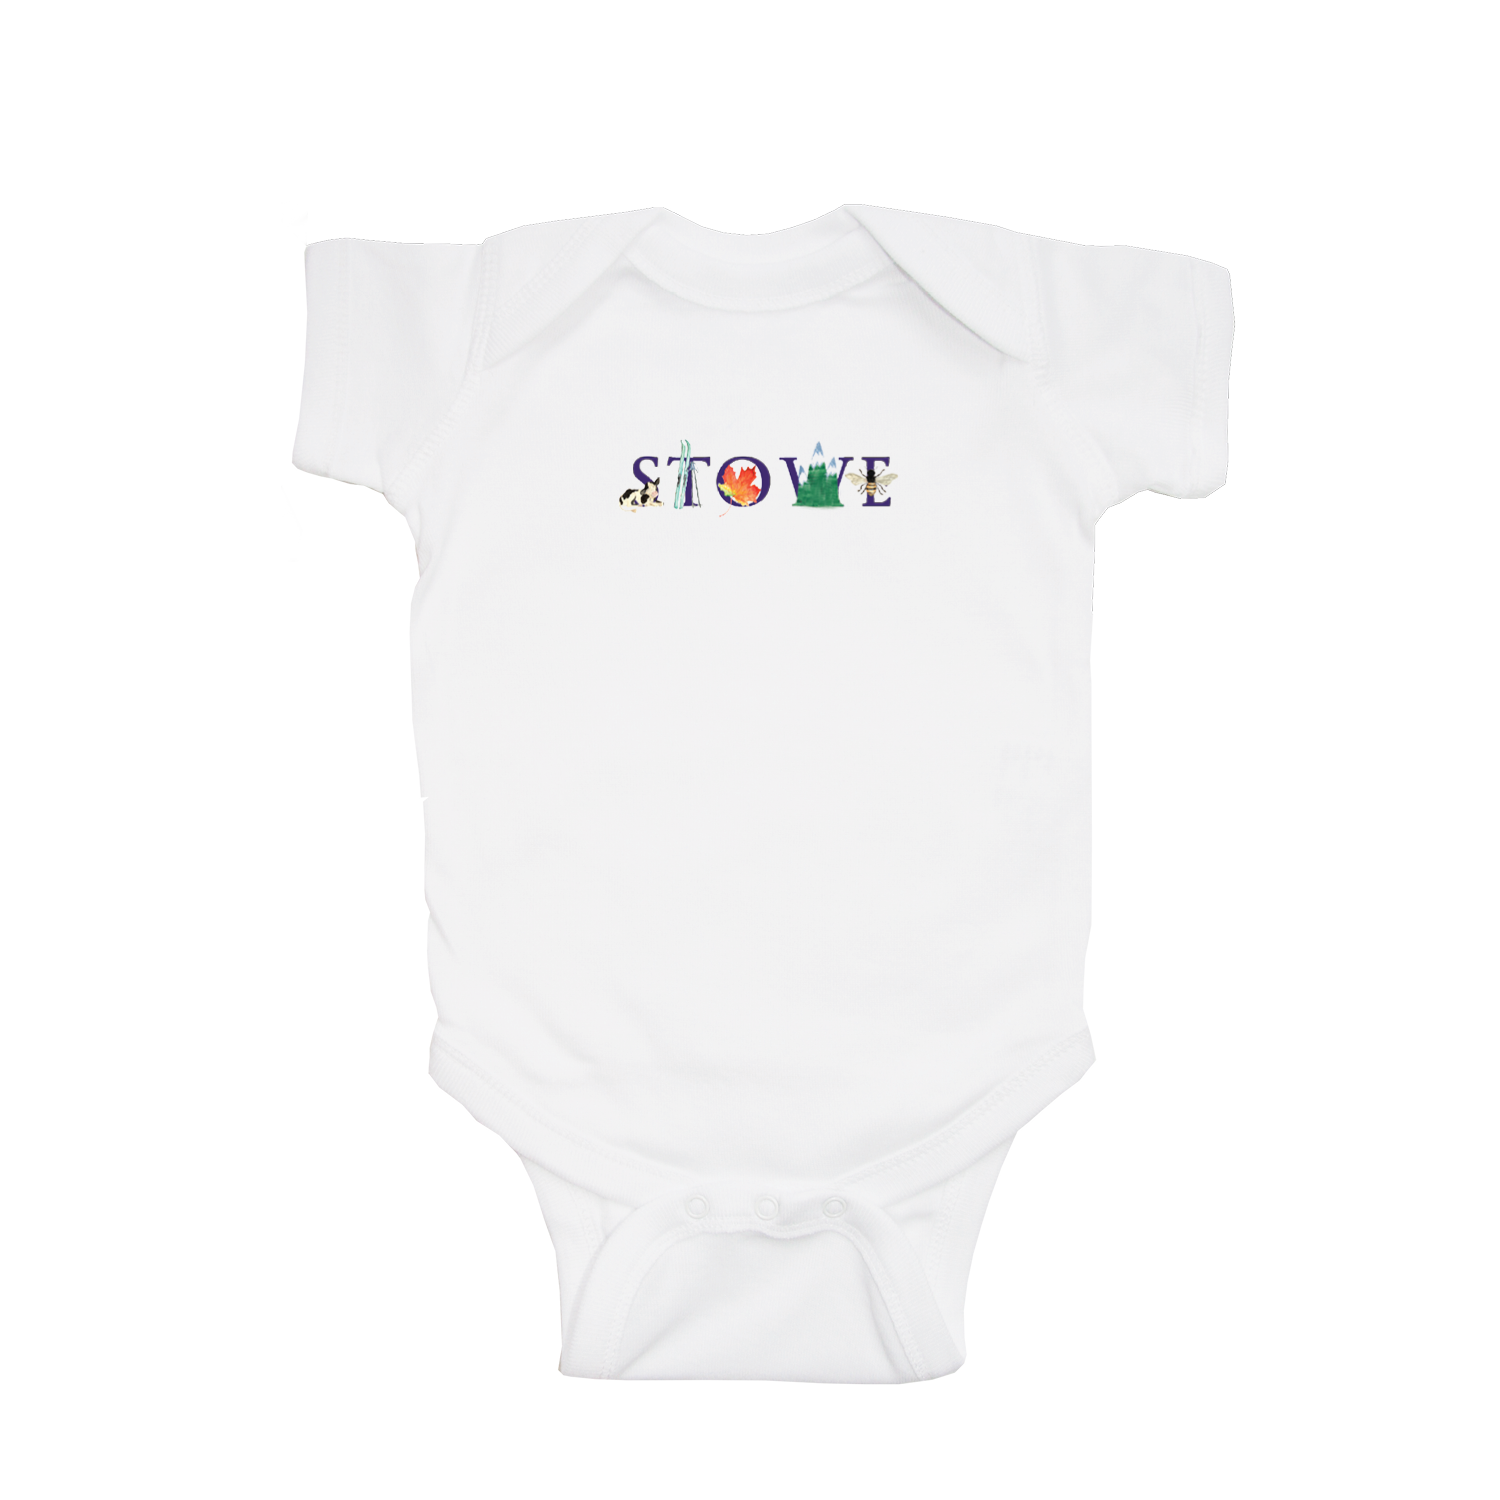 stowe, vt baby snap up short sleeve